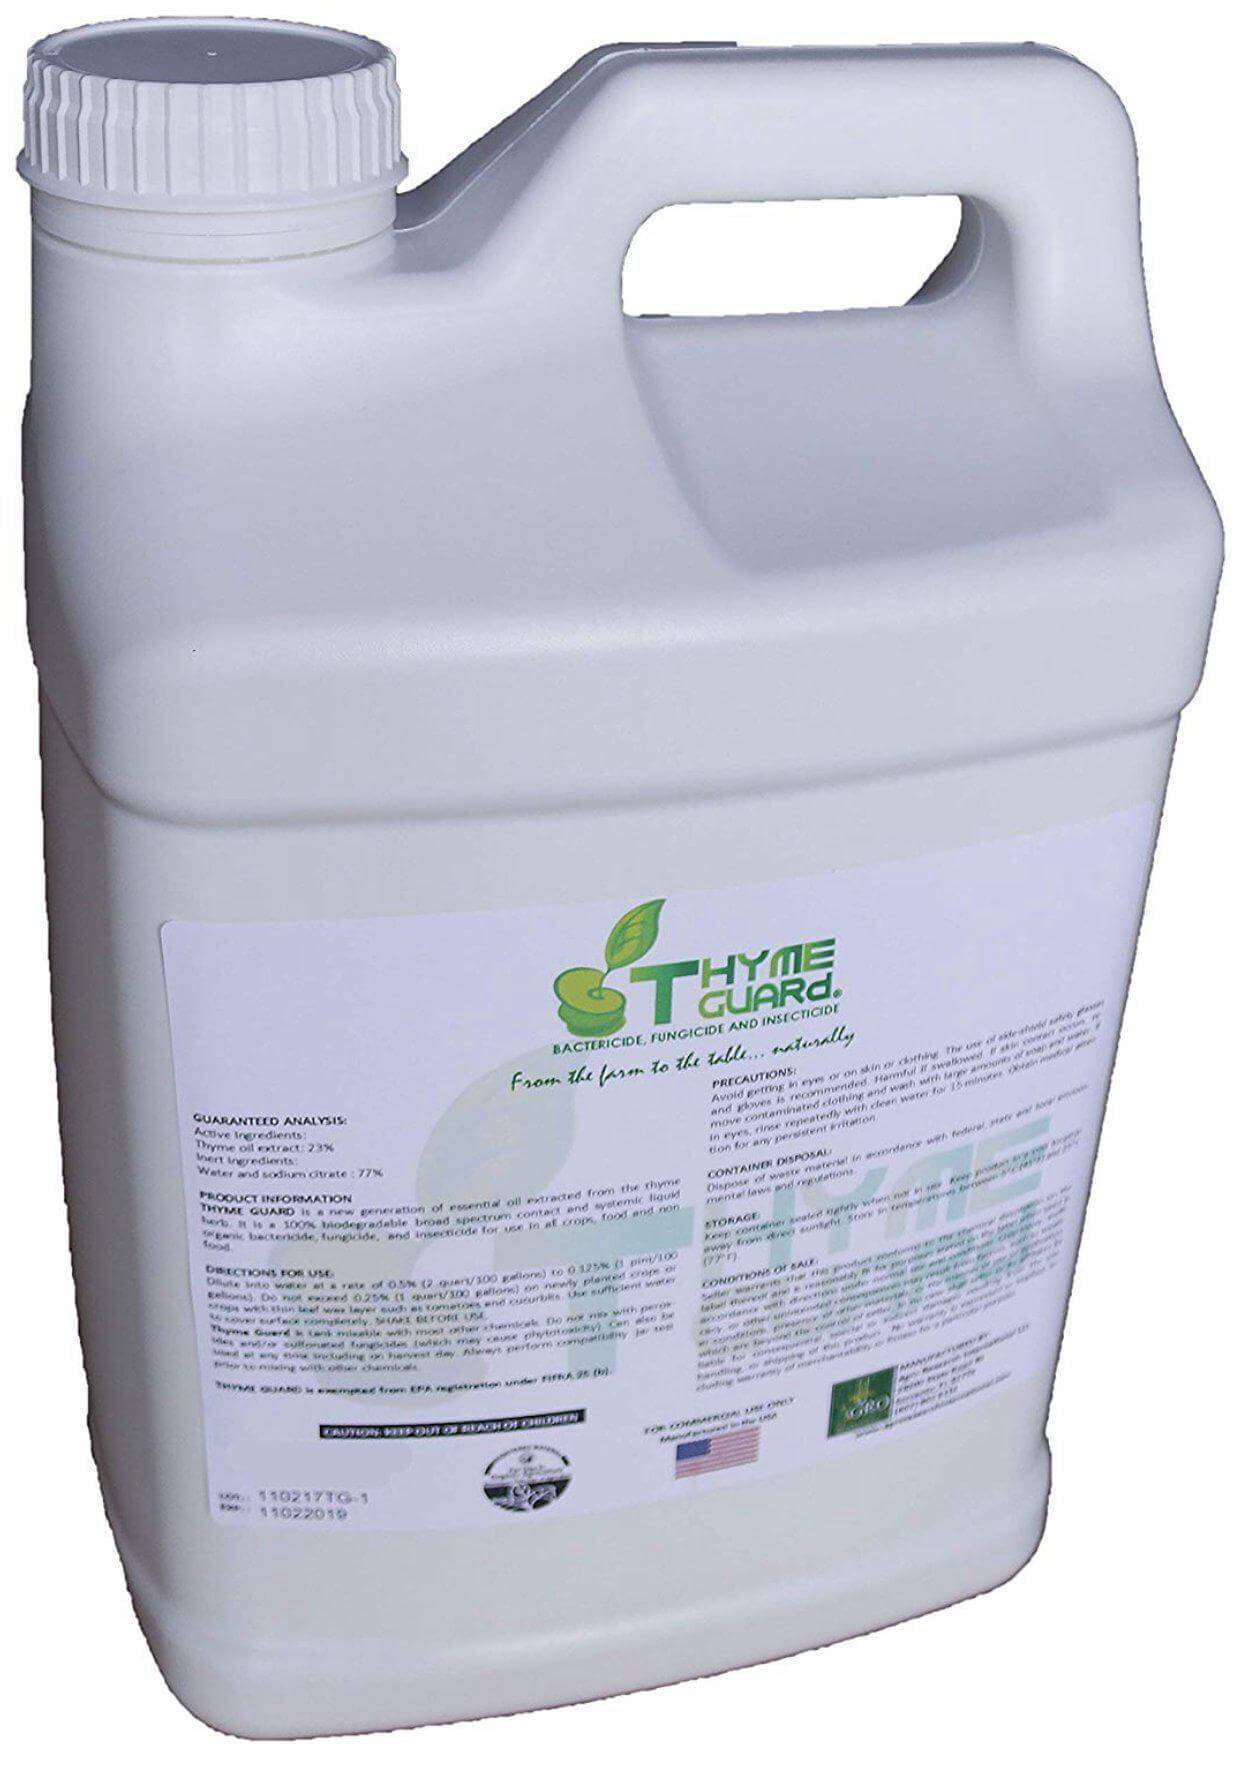 Agro Research International Crop Protection 2.5 gal Agro Thyme Guard